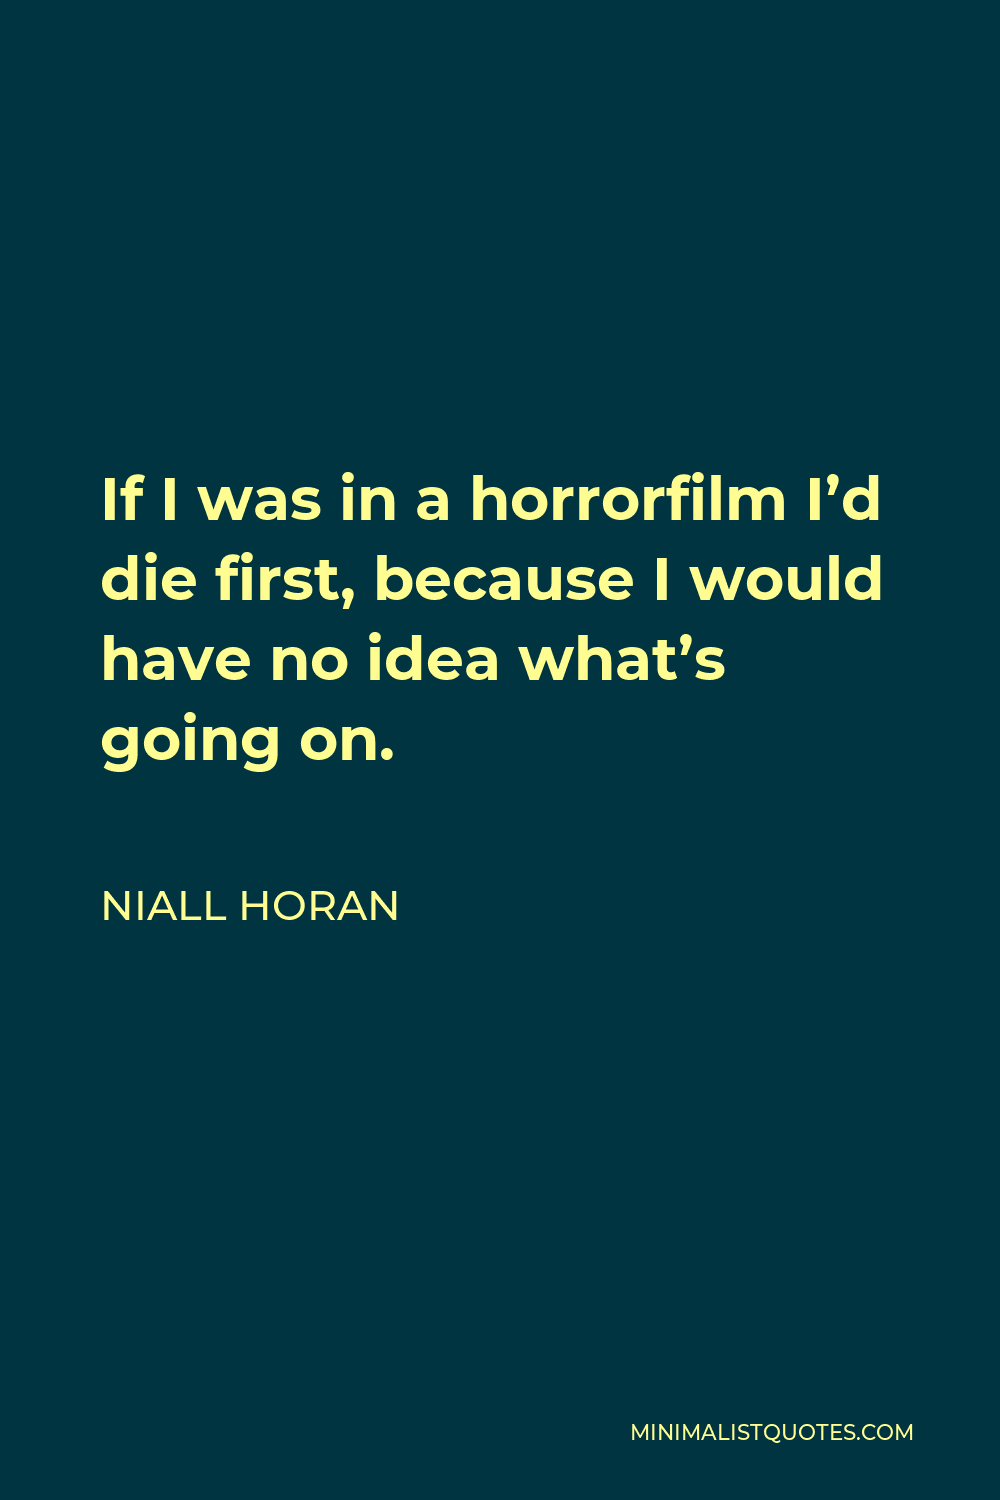 Niall Horan Quote - If I was in a horrorfilm I’d die first, because I would have no idea what’s going on.